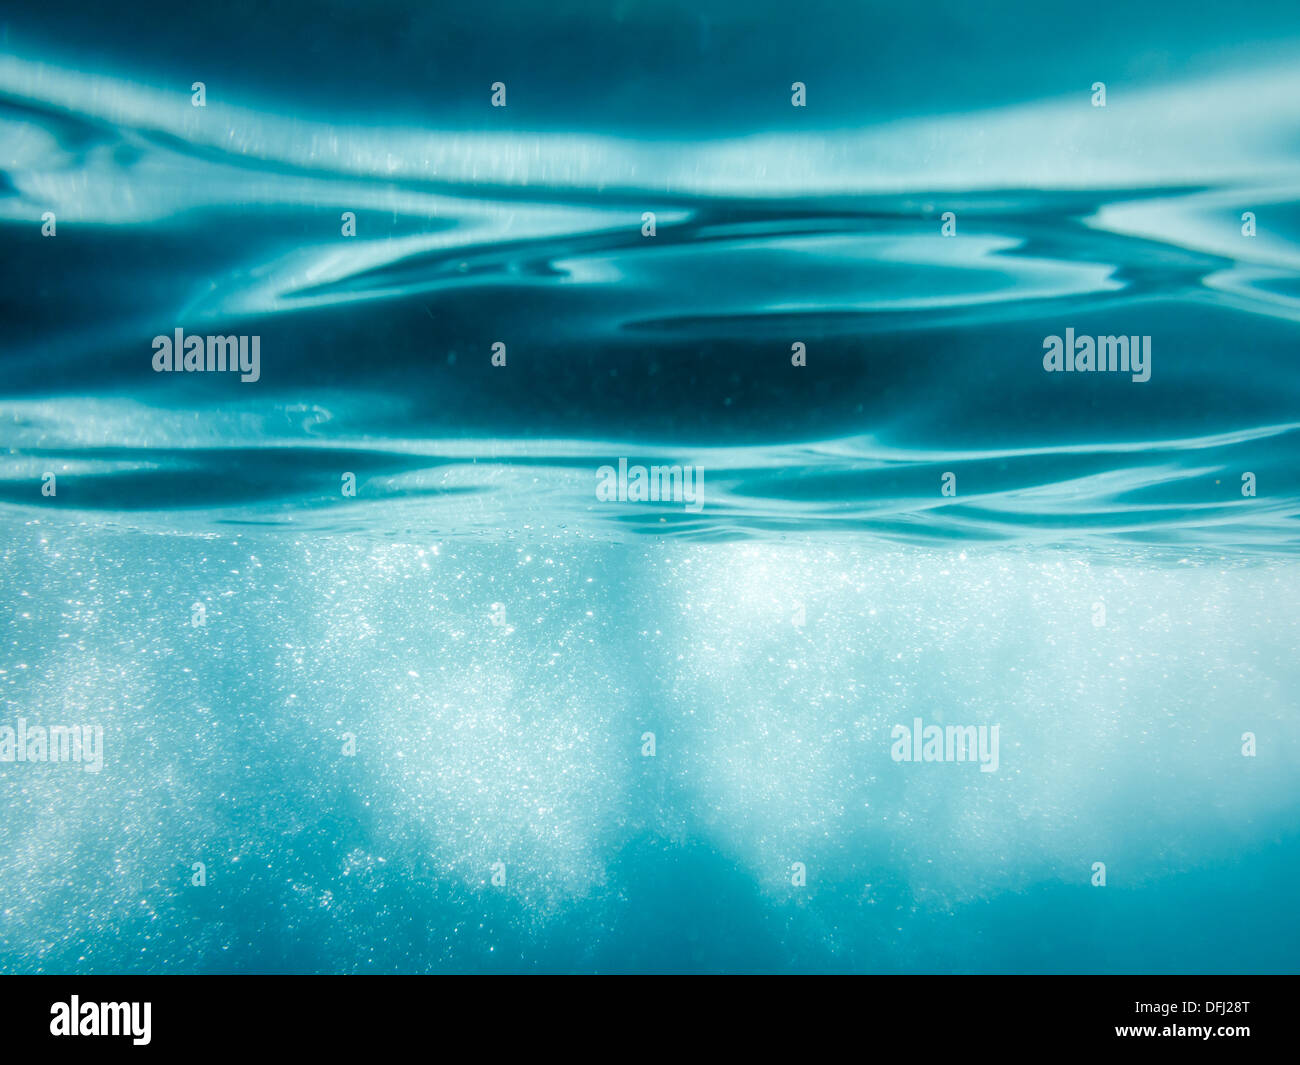 Abstract Clear turquoise Water Pattern Stock Photo